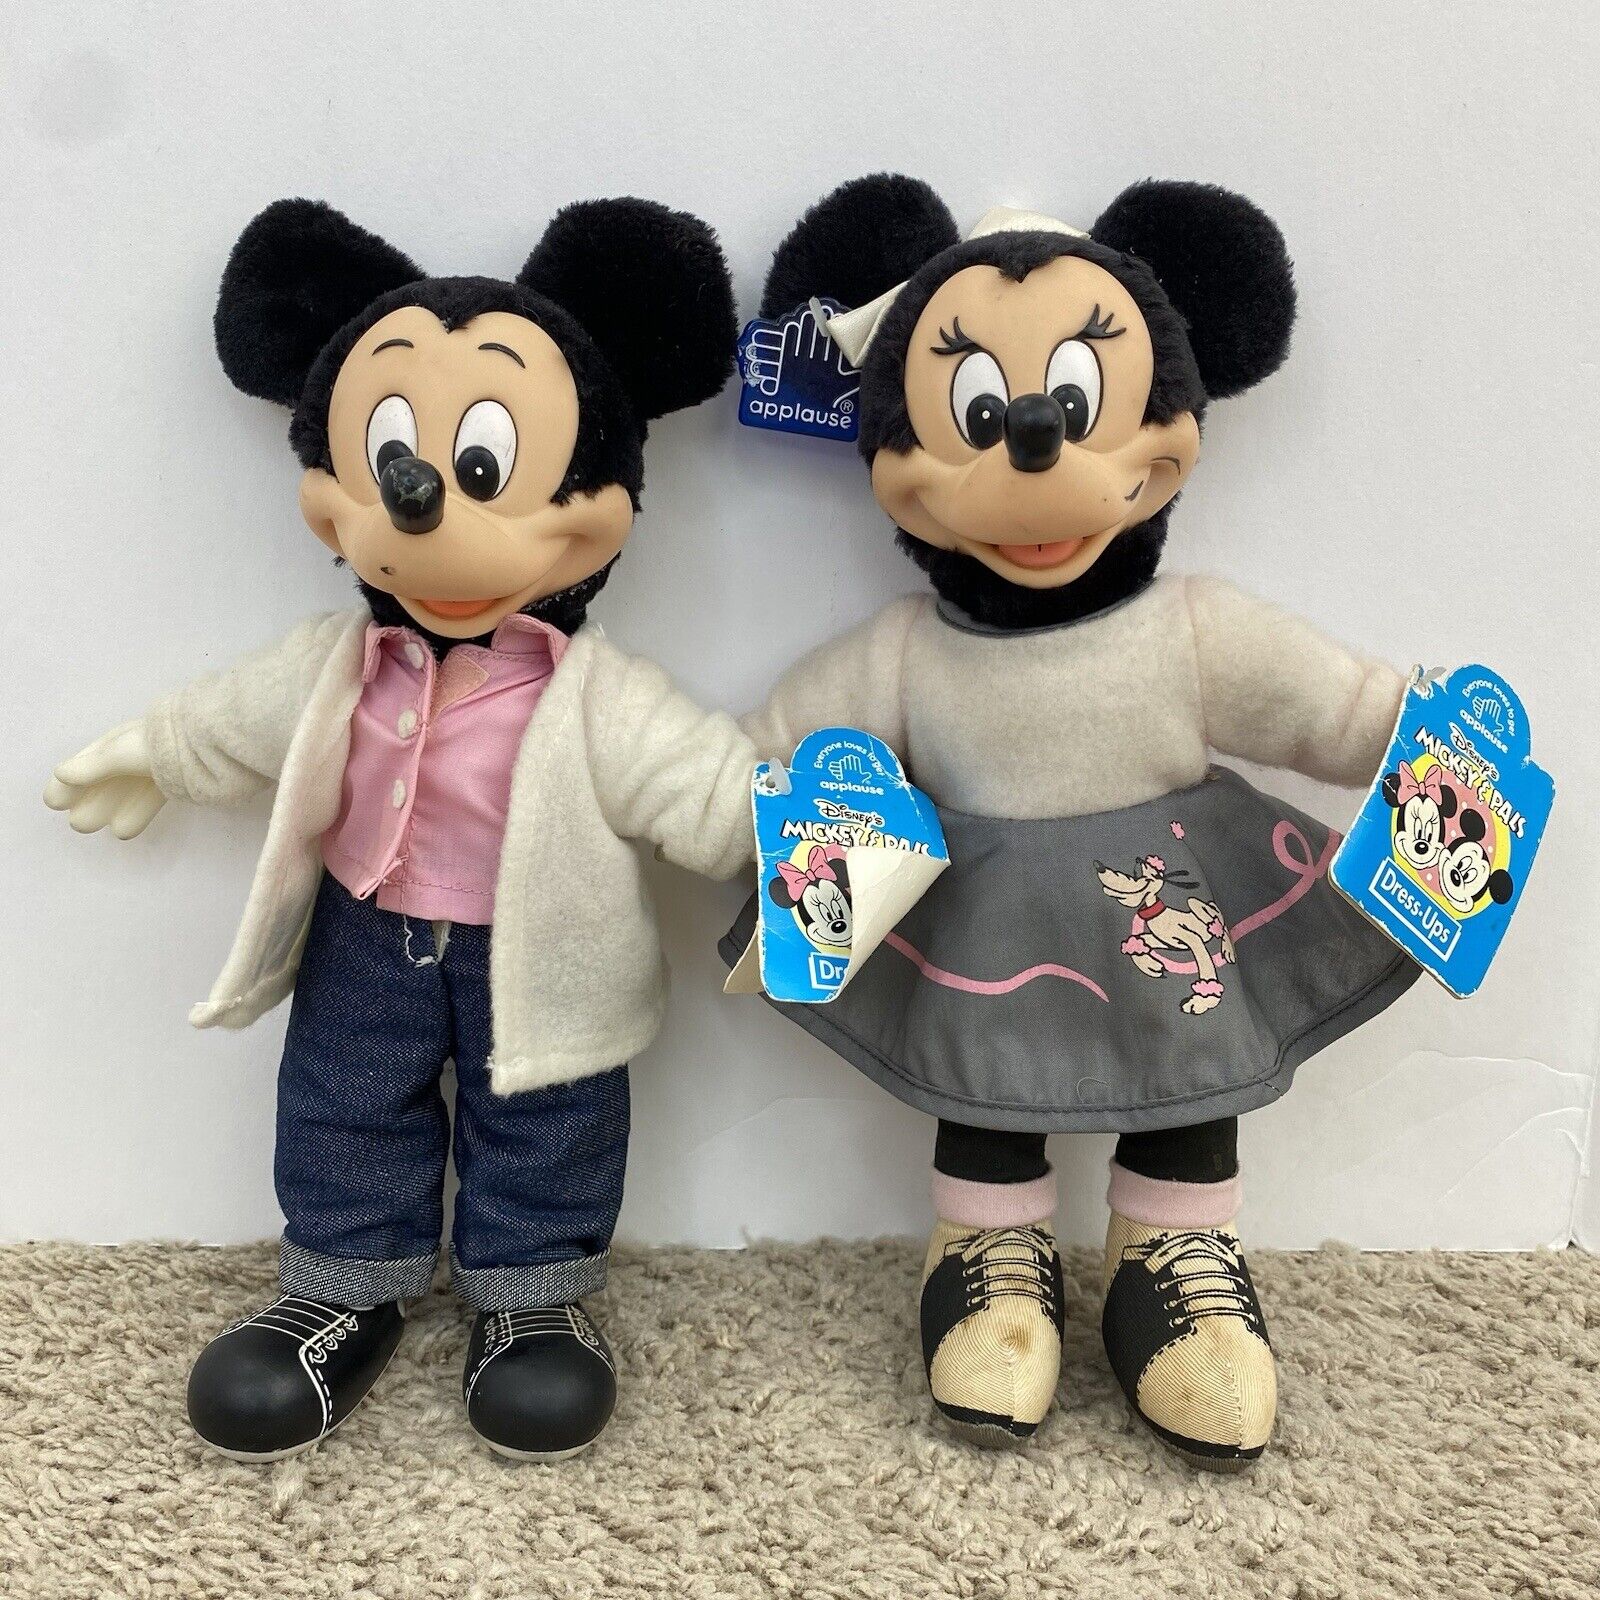 Vintage Disney Mickey & Minnie Mouse Applause Sock Hop Plush Dolls - With Tags